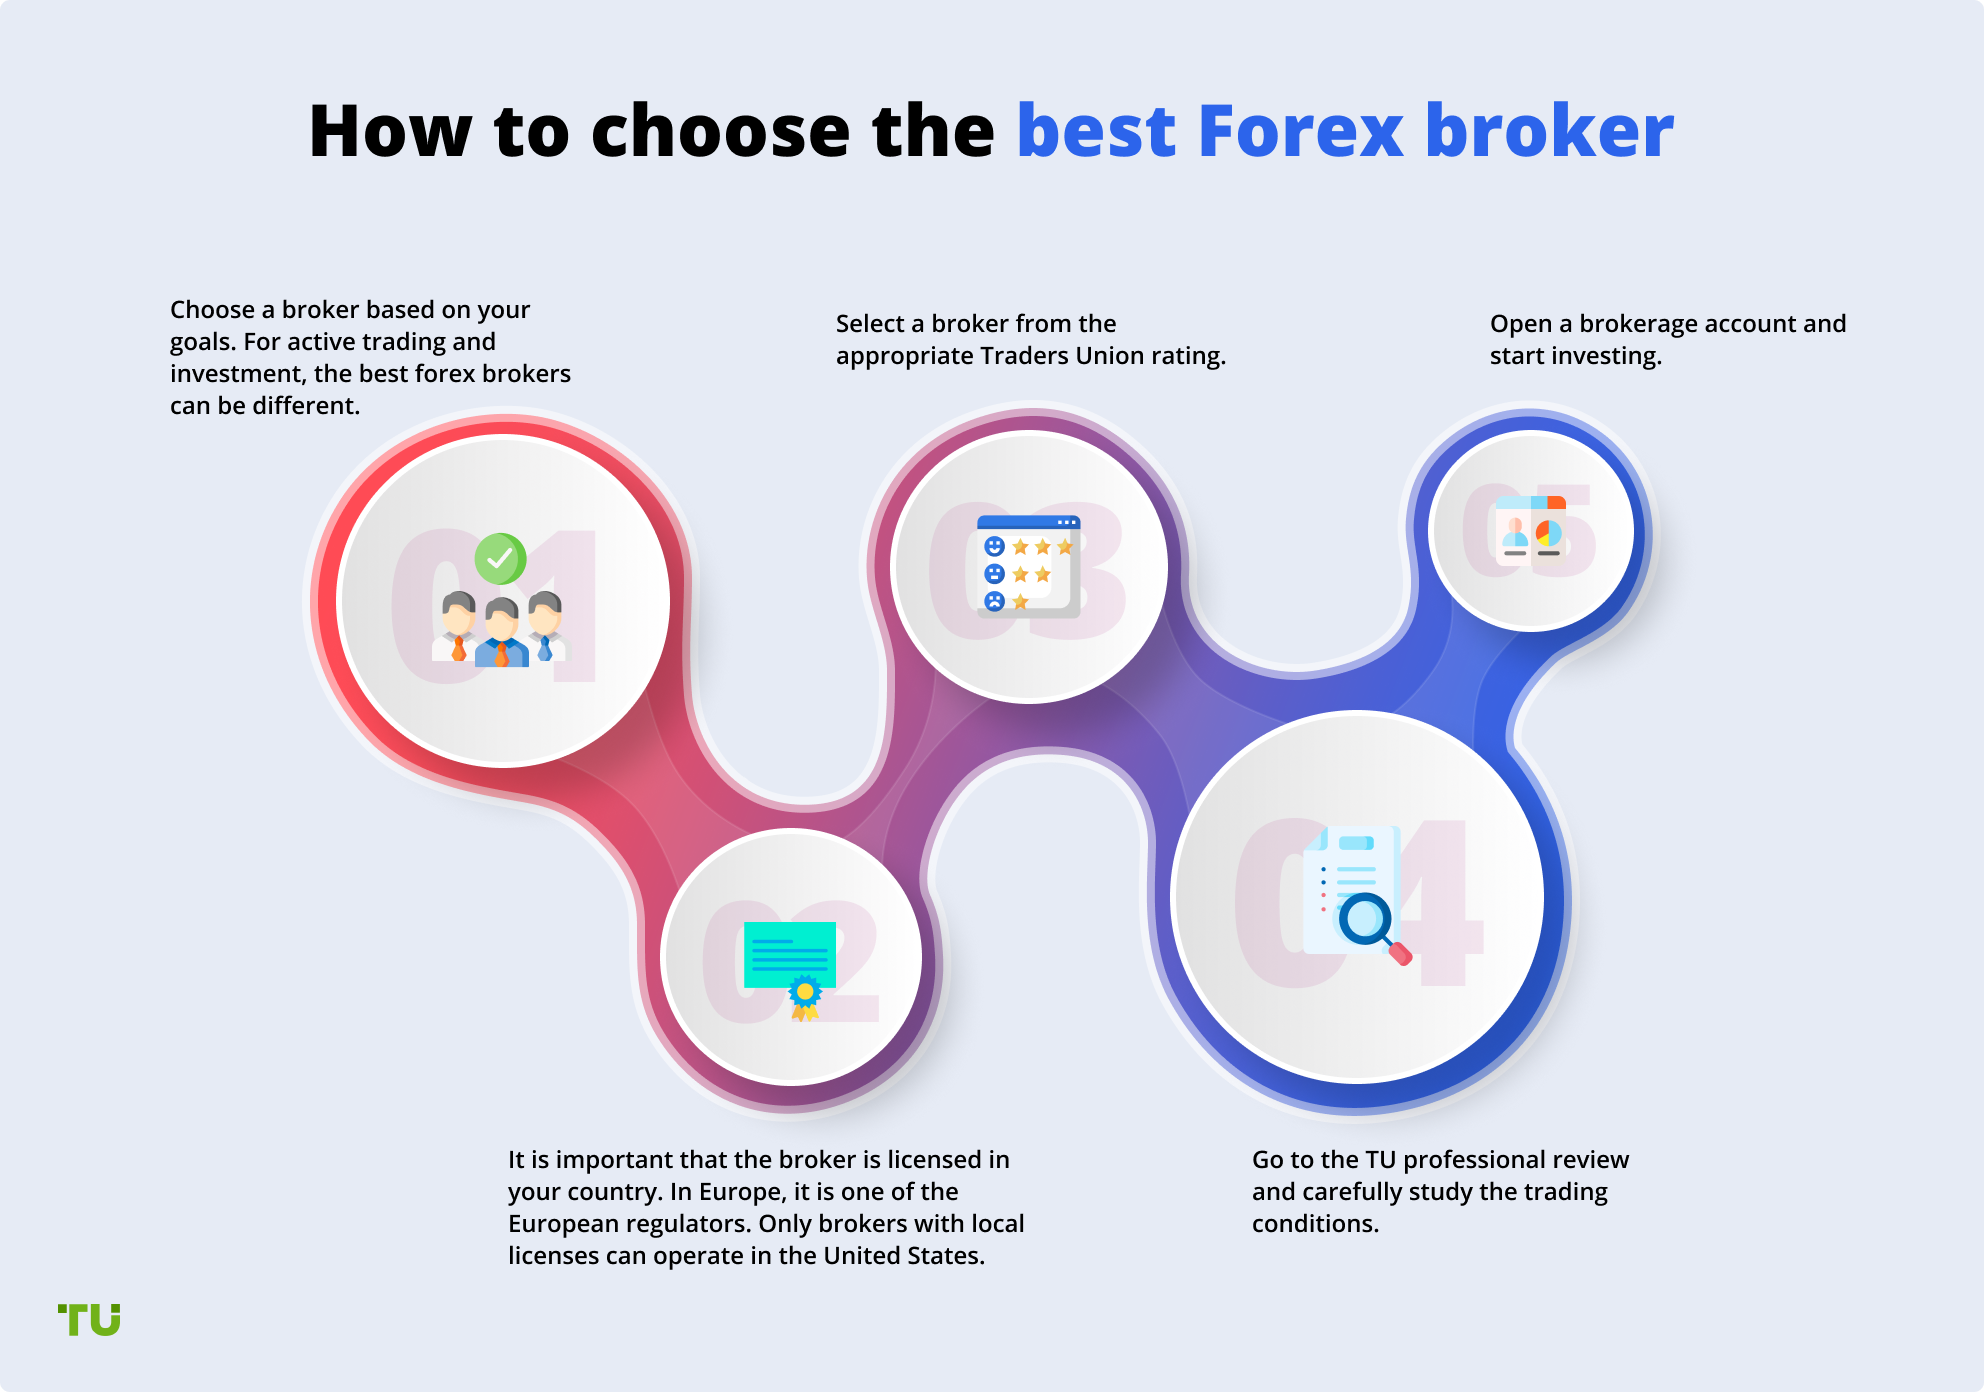 Best forex brokers review best cars to buy as an investment